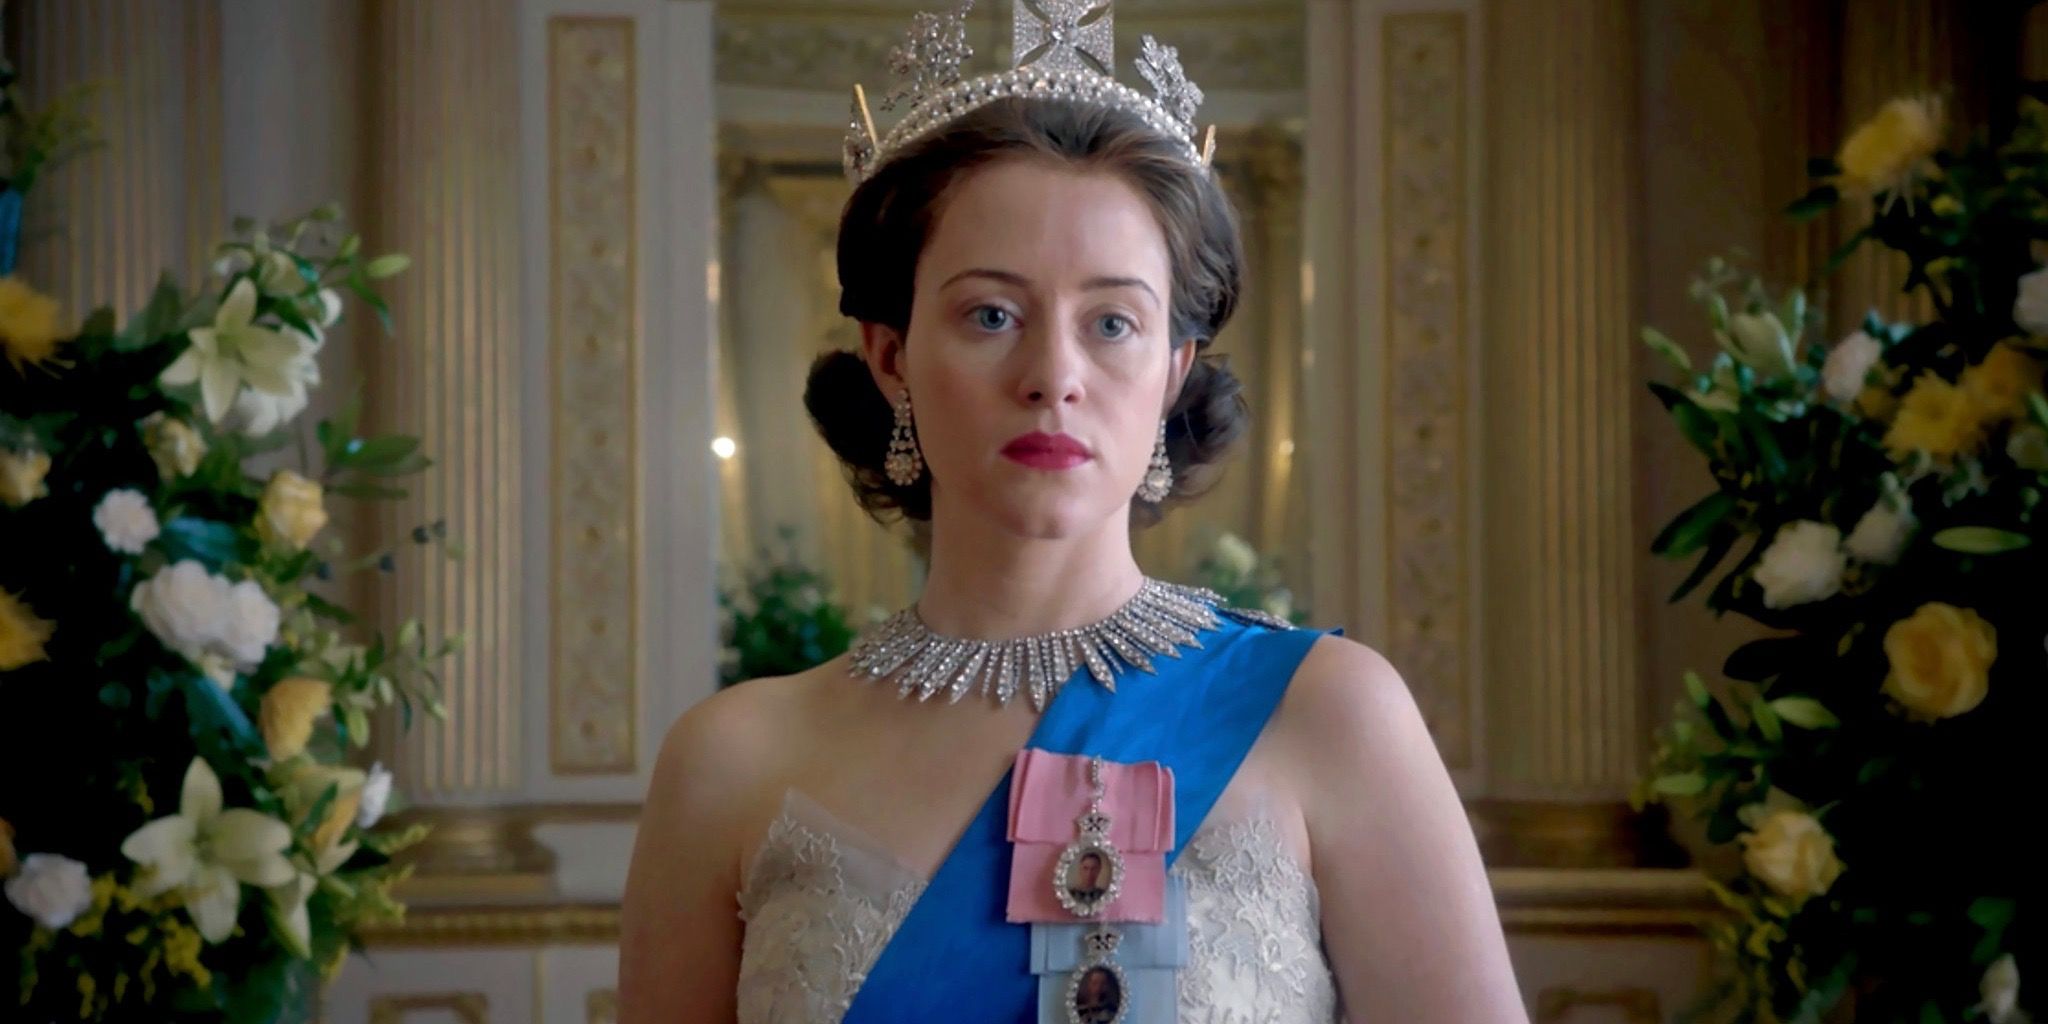 Claire Foy Says She 'Can't Help but Feel Exploited' While Filming Sex  Scenes